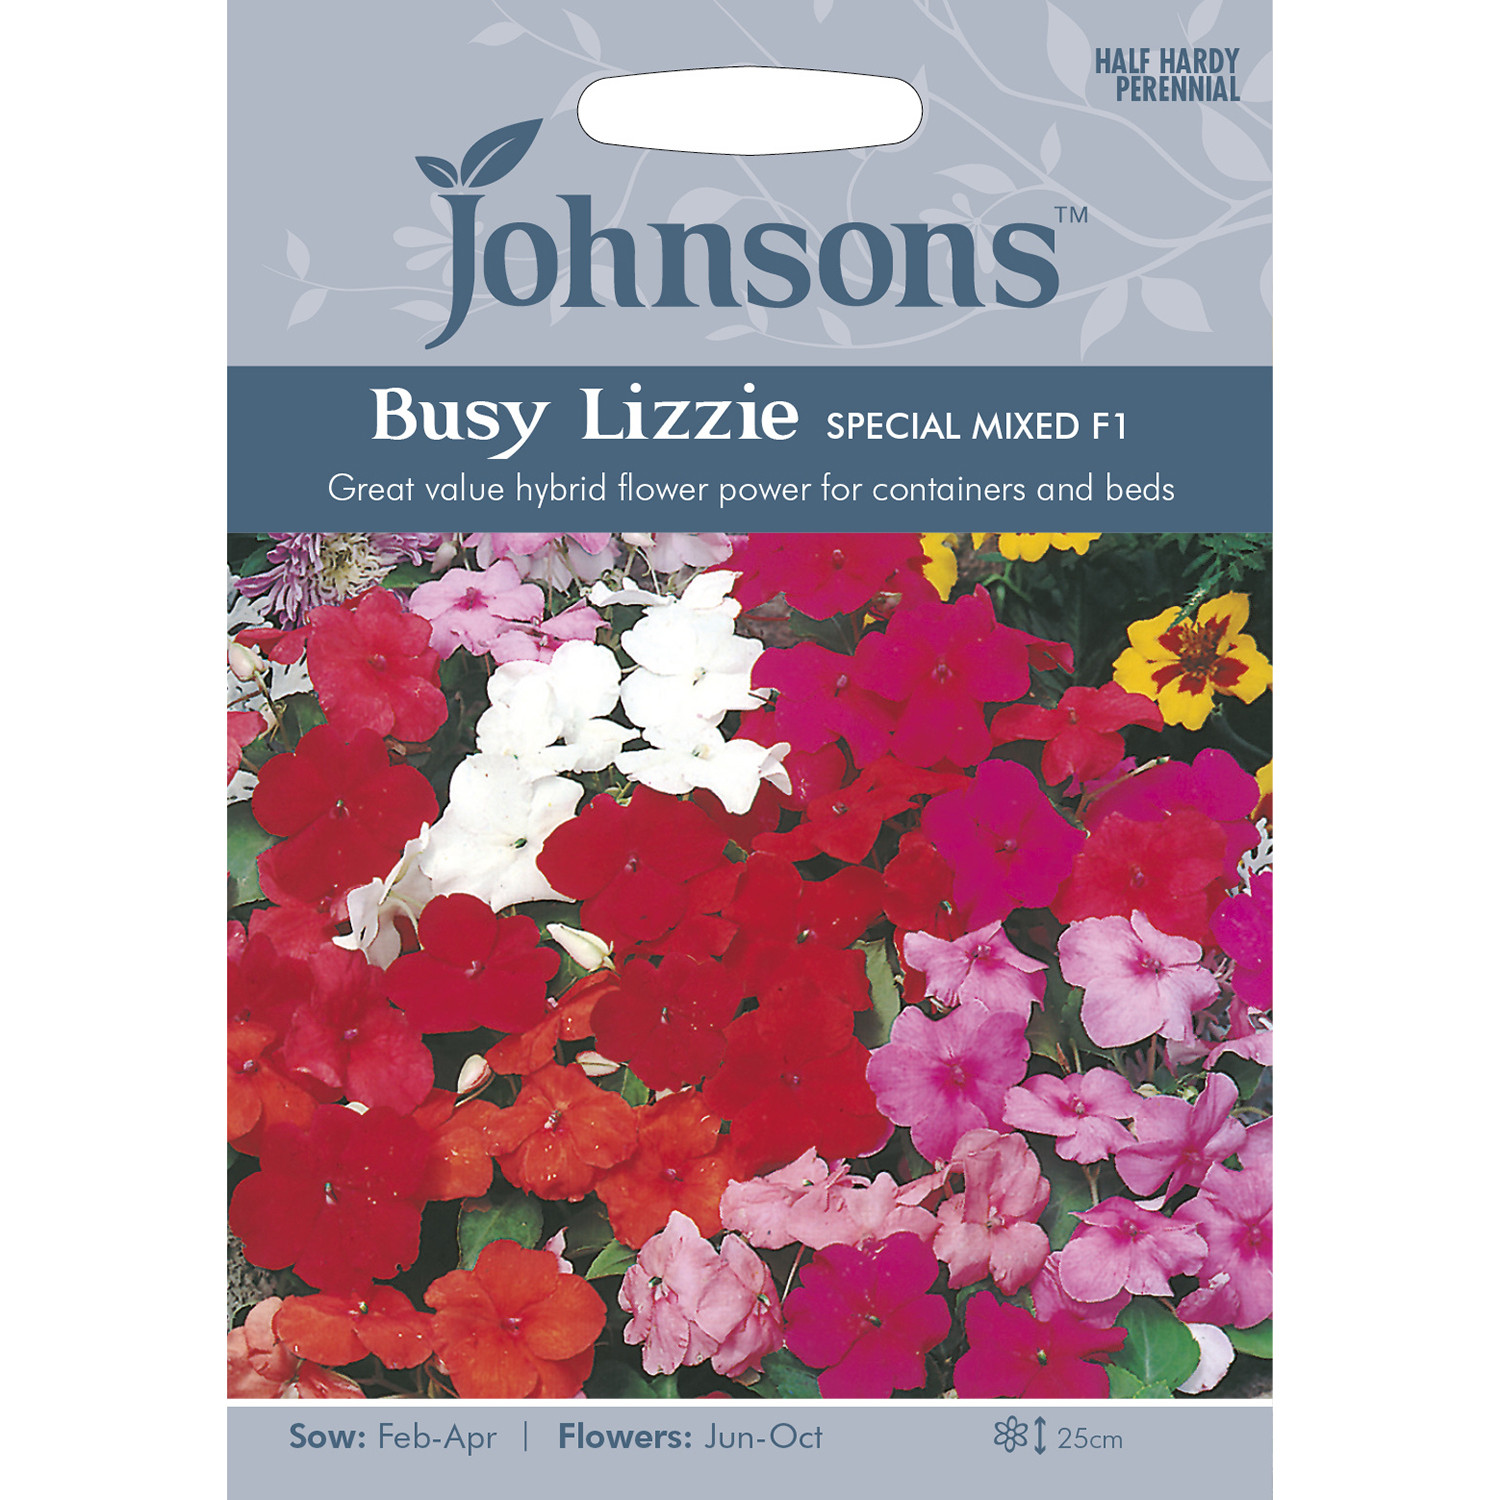 Johnsons Busy Lizzie Special Mixed F1 Flower Seeds Image 2